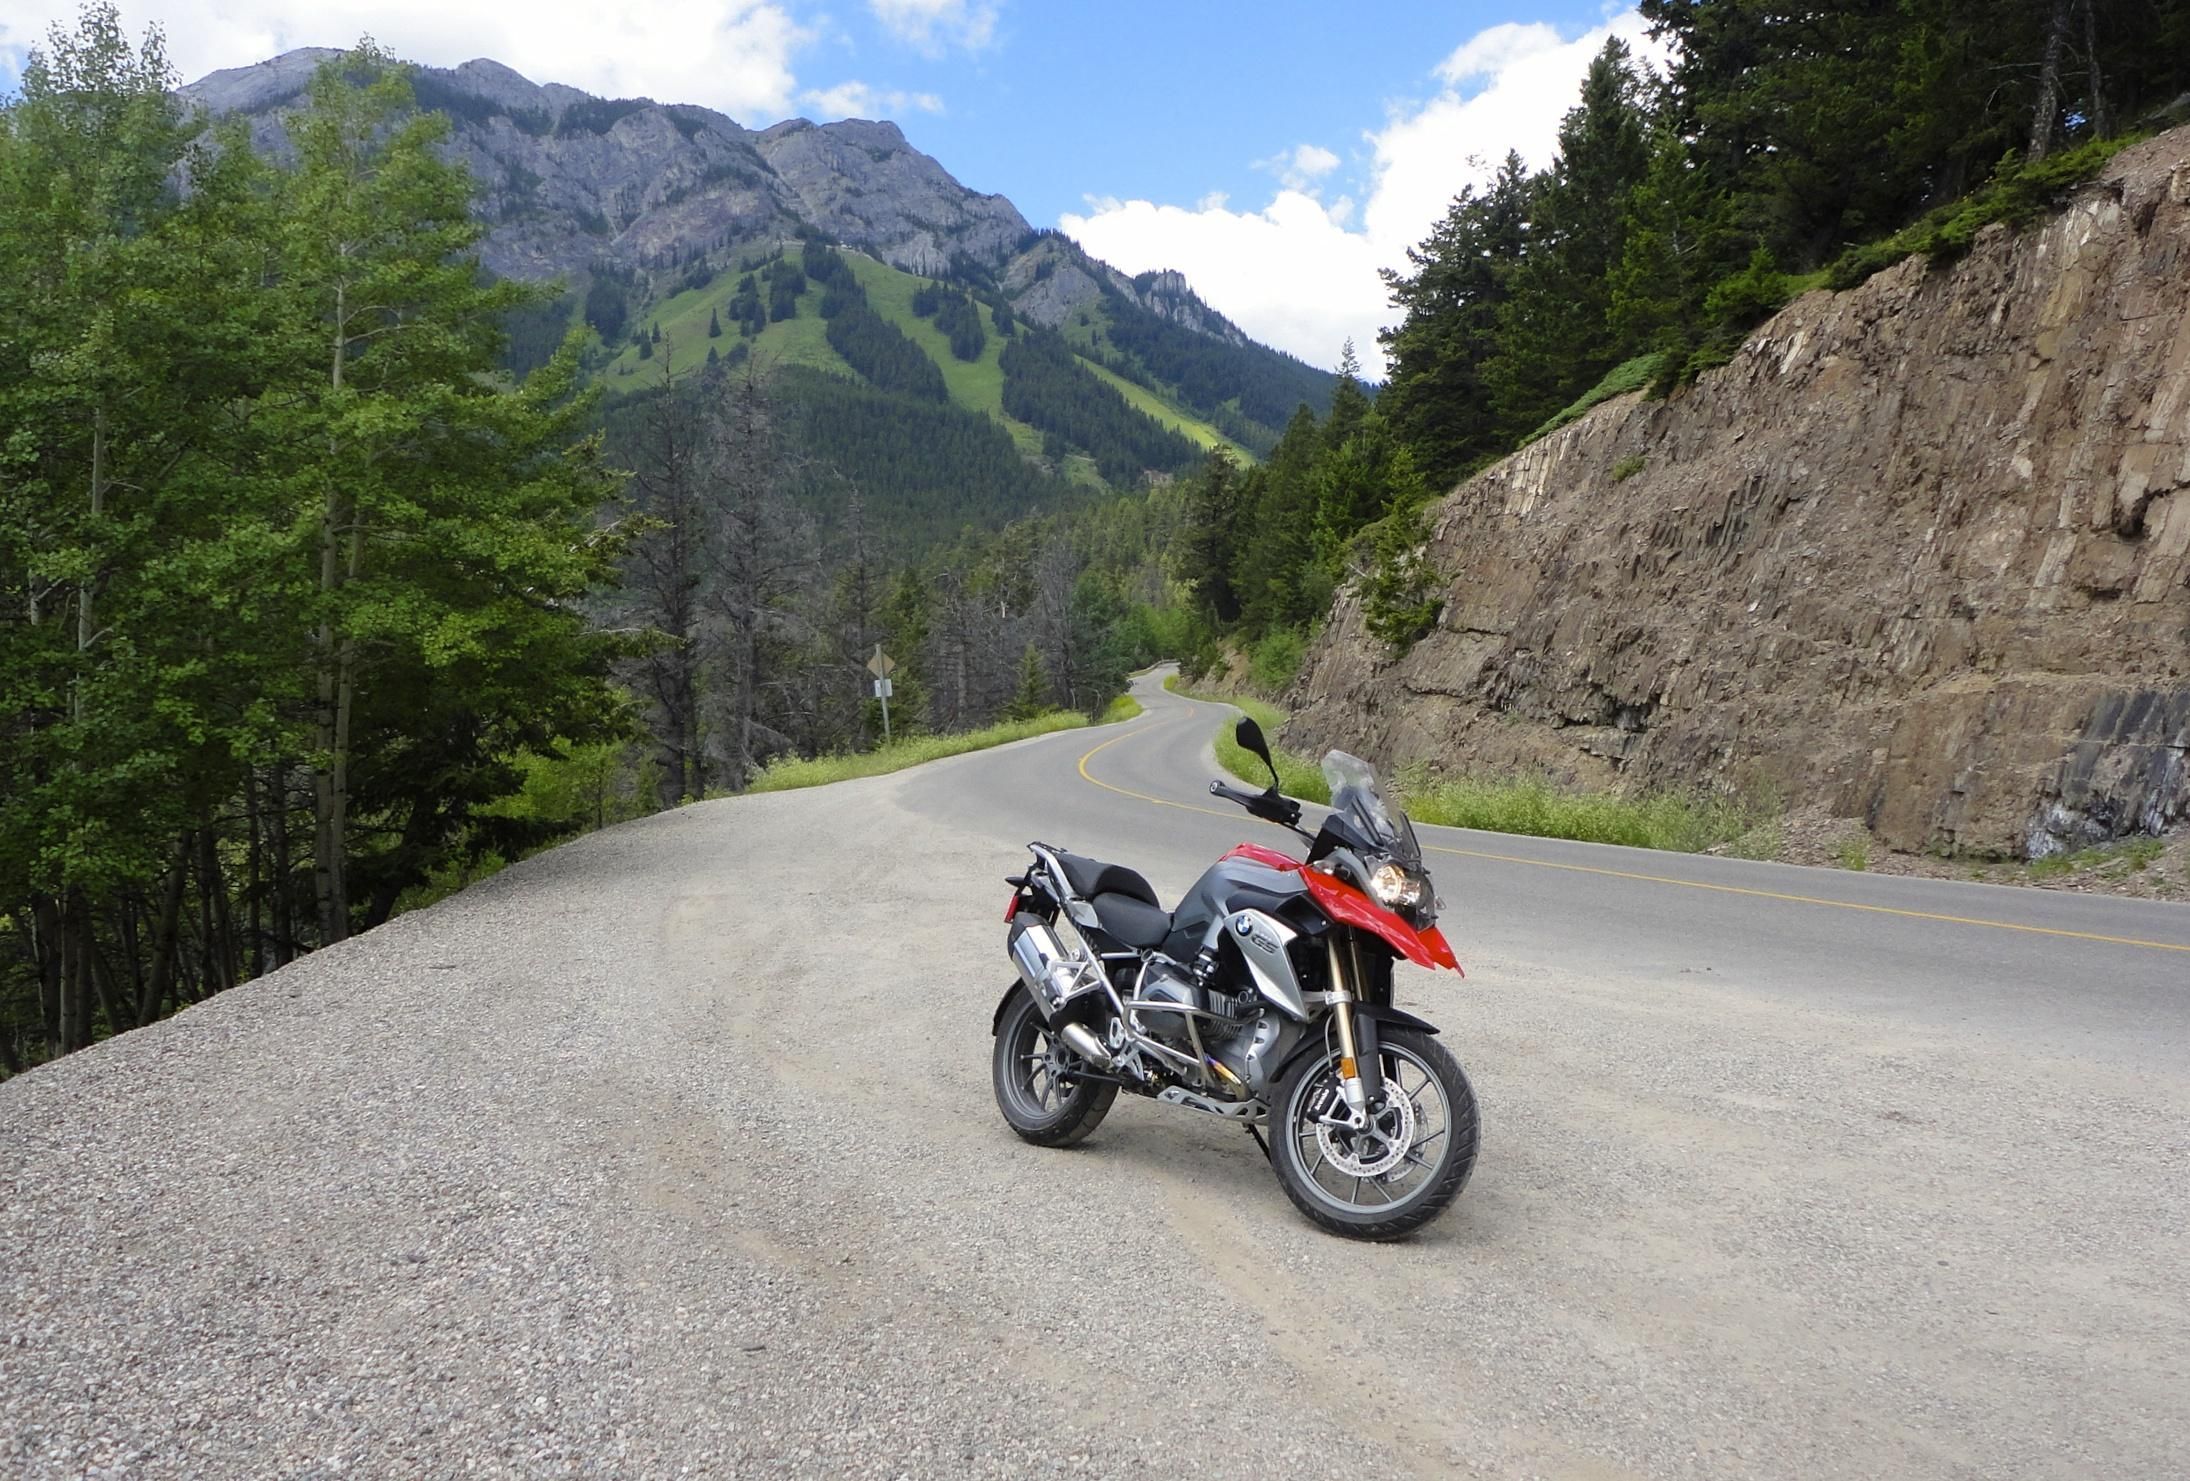 R1200GS + Mountains = Beauty